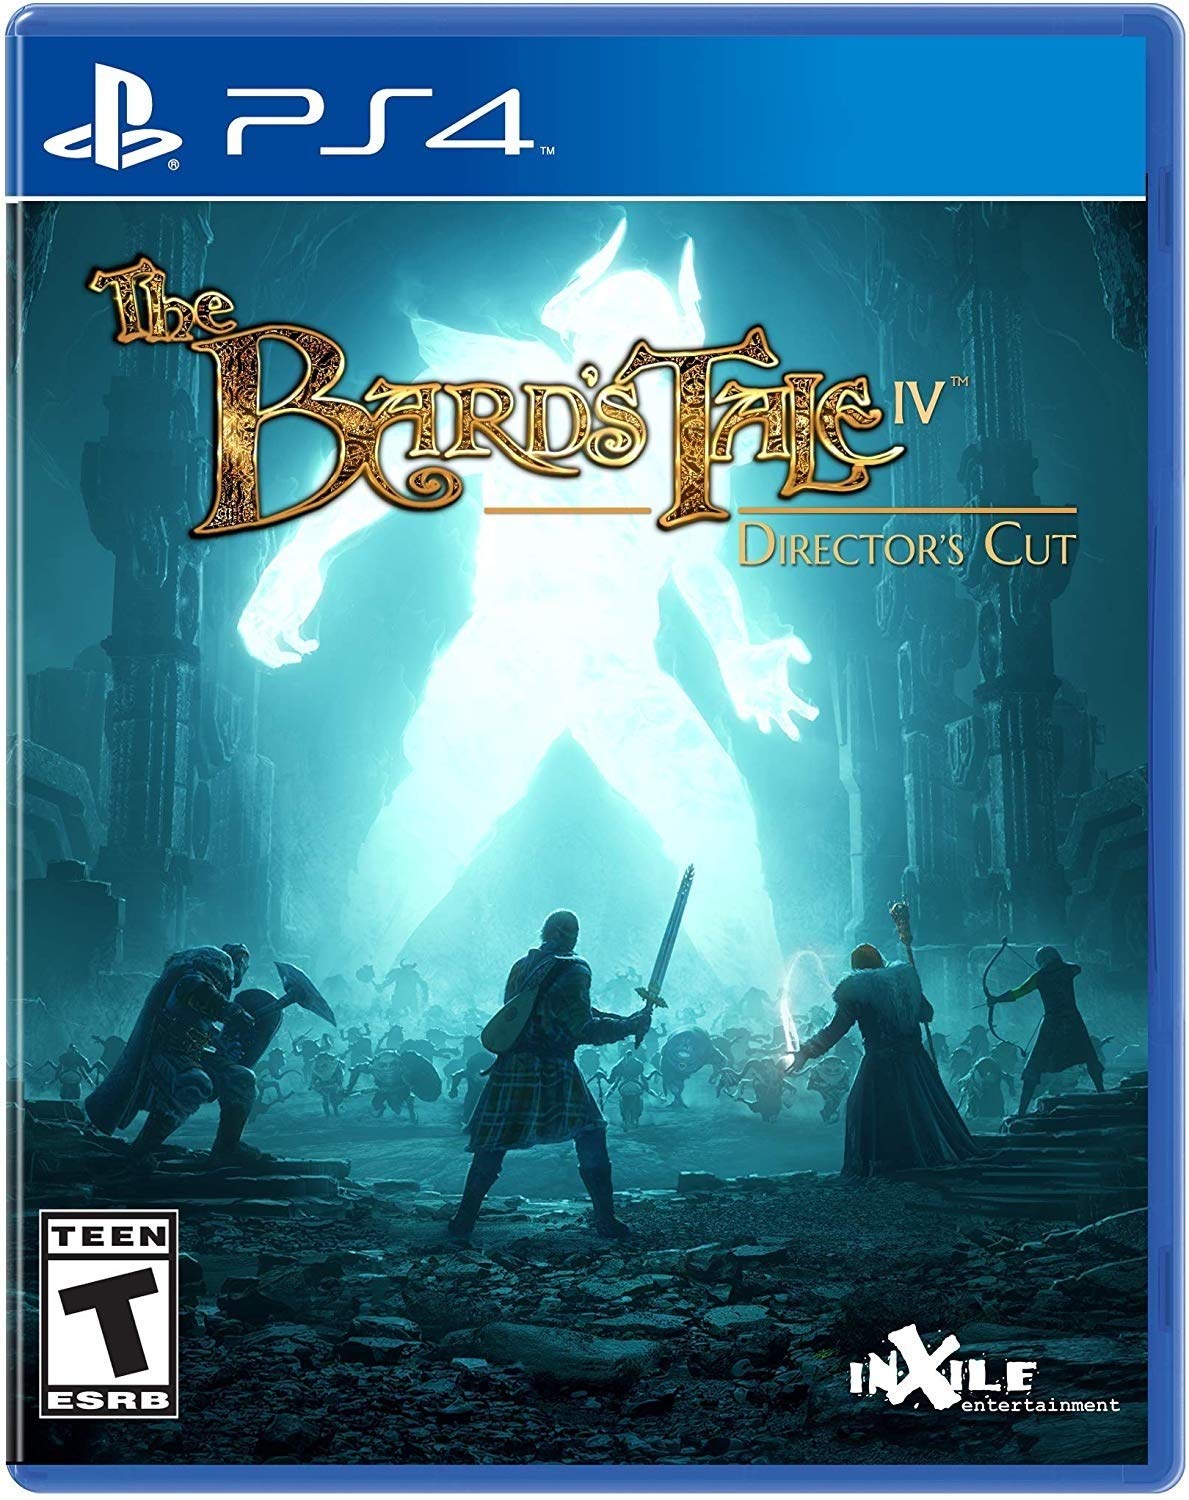 Bards Tale IV, The